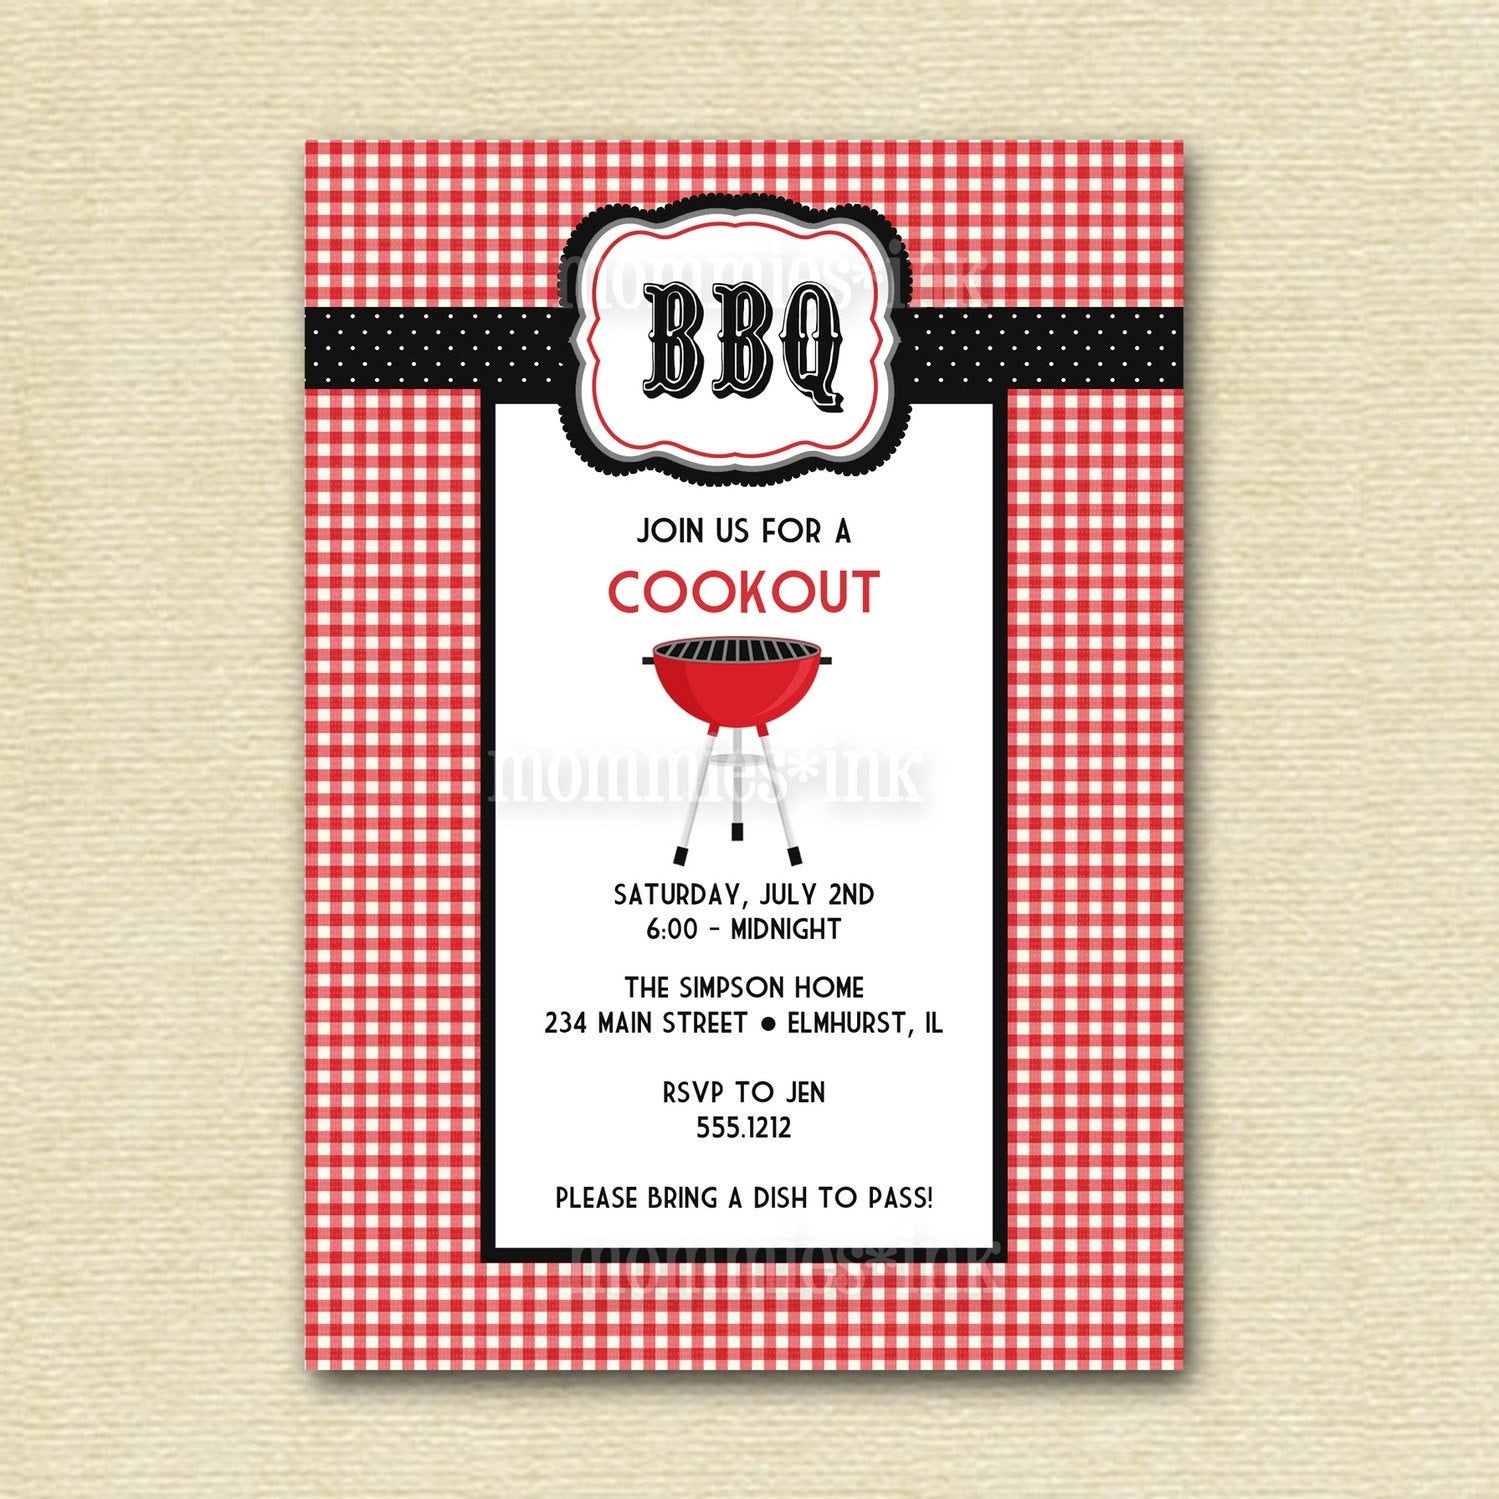 Free Bbq Invitation Templates - Free Printable Cookout Invitations